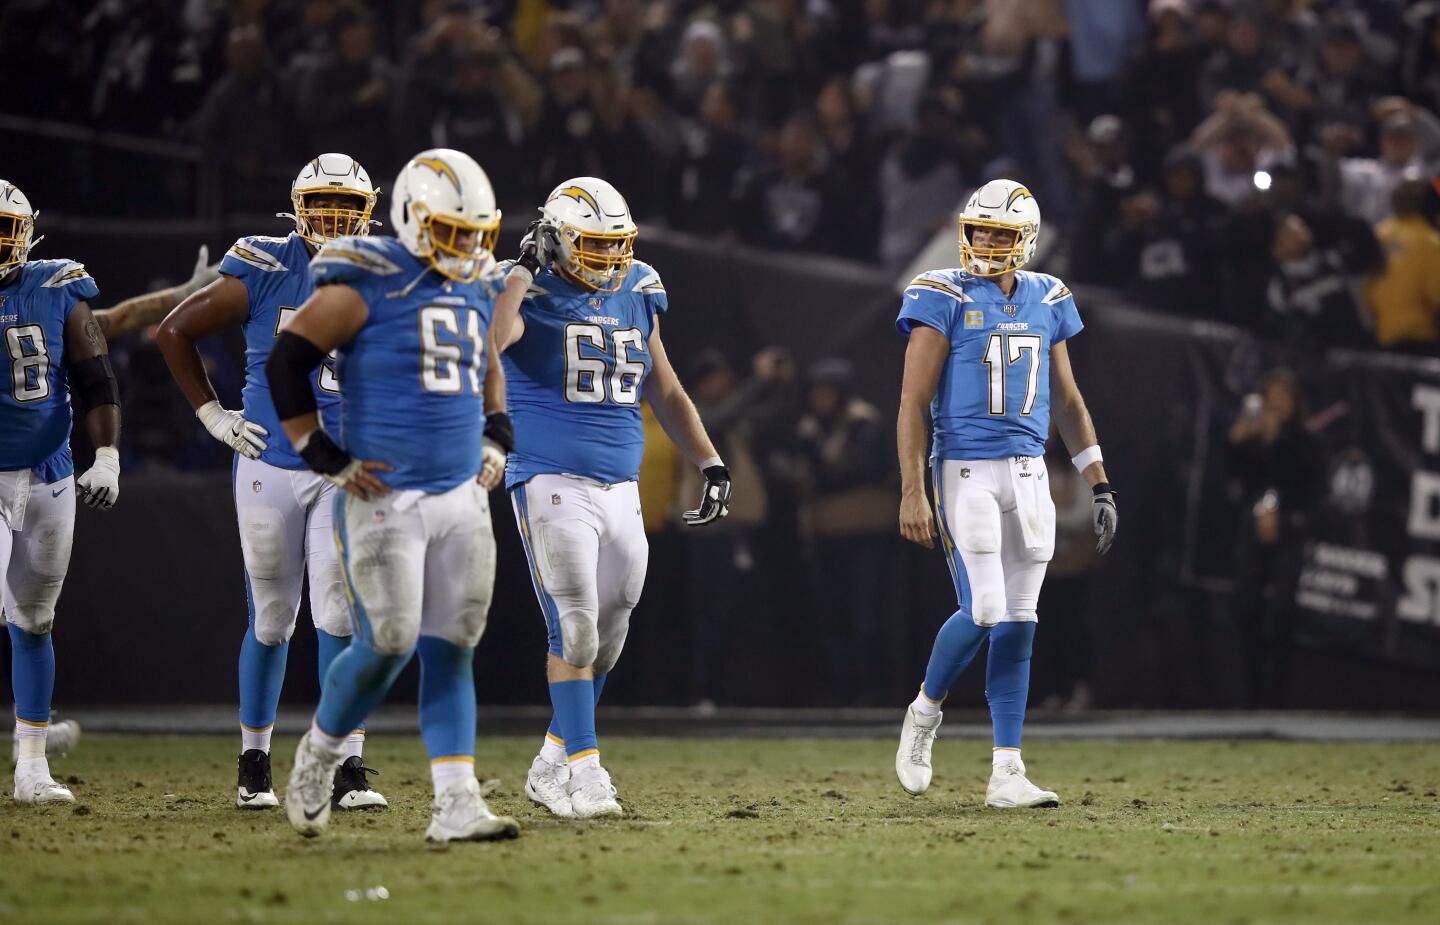 Chargers quarterback Philip Rivers walks off the field after his pass was intercepted late in the fourth quarter of a game Nov. 7 against the Raiders at RingCentral Coliseum.